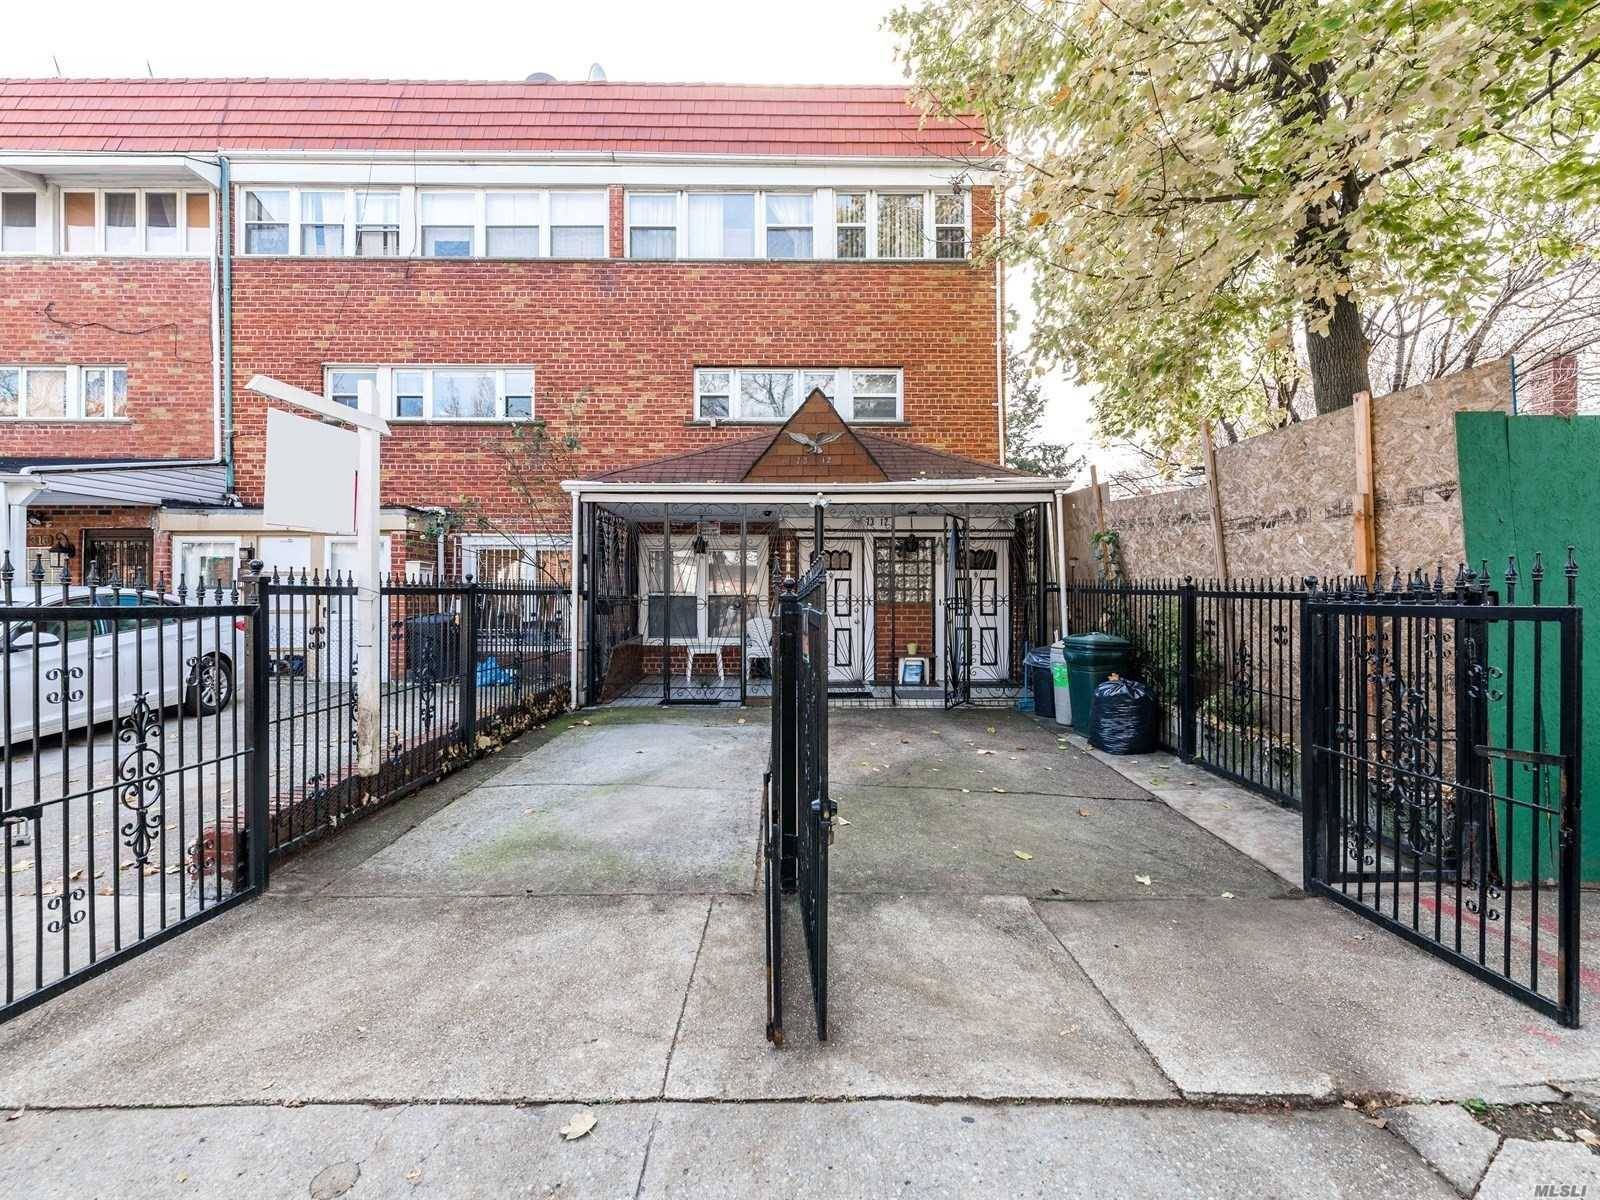 Great large 2 Family home in Prime East Elmhurst location, within walking distance to shopping, transportation, minutes to all major NYC Highways and Airports.